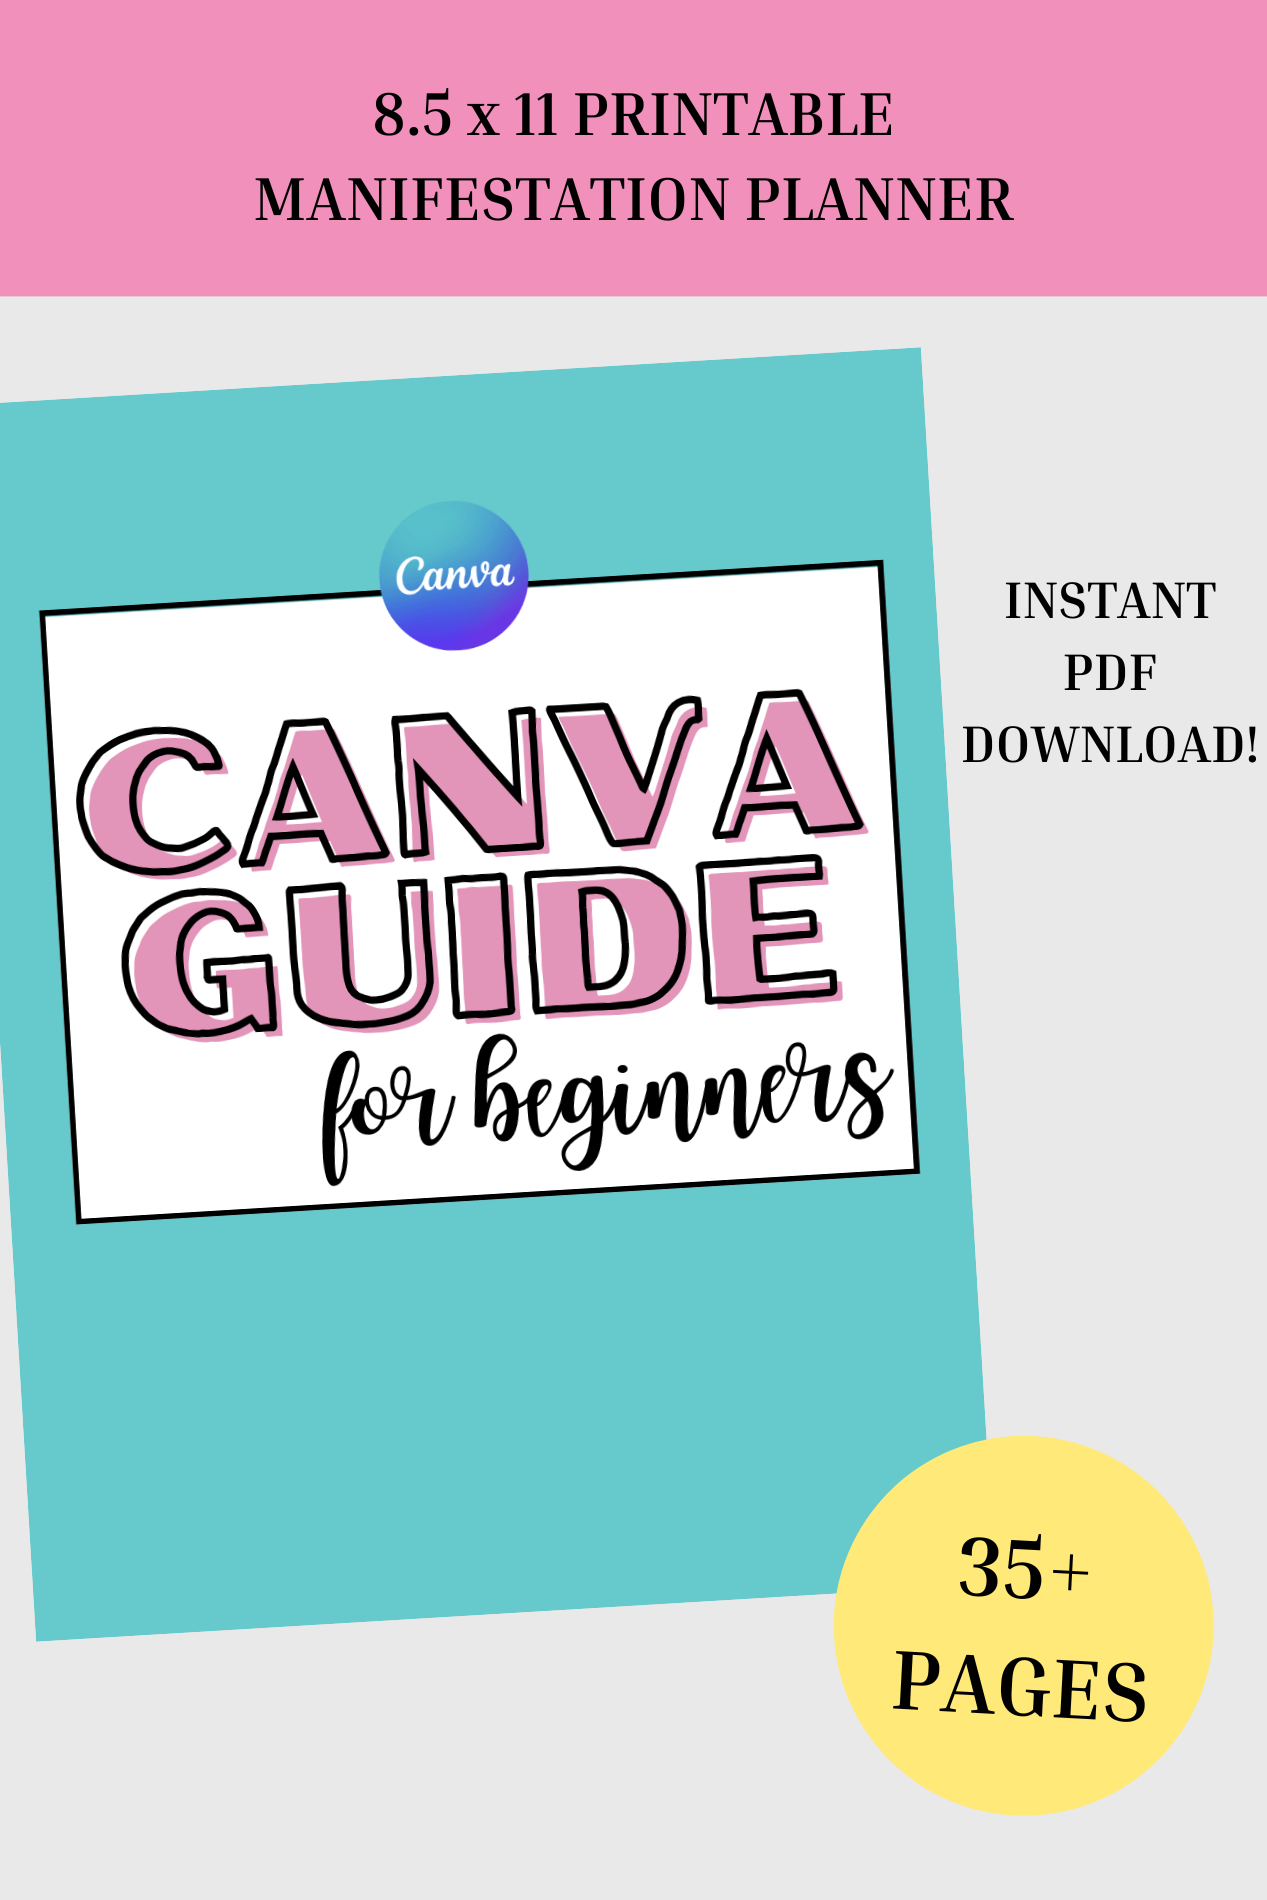 Canva Guide for Beginners [35+ pages]